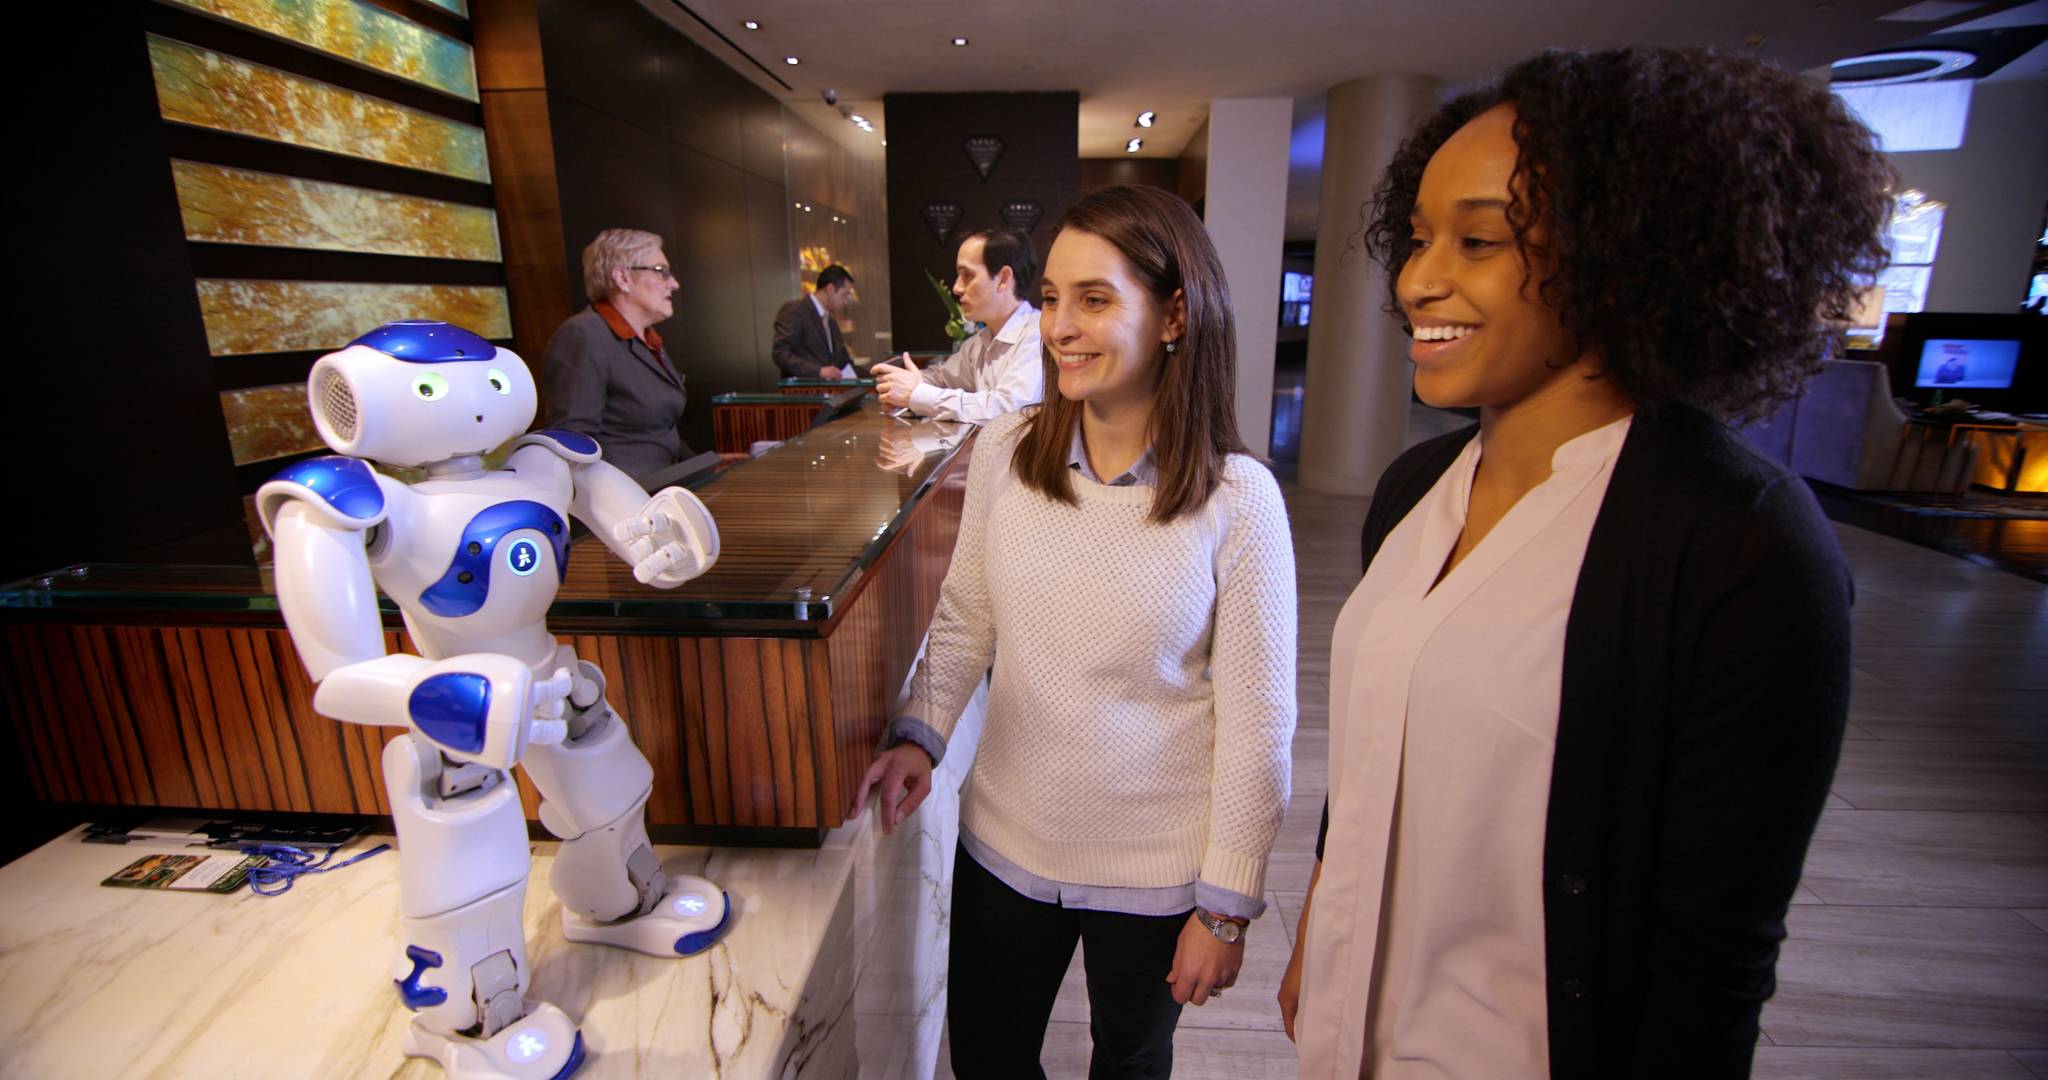 People are getting used to robotic customer service